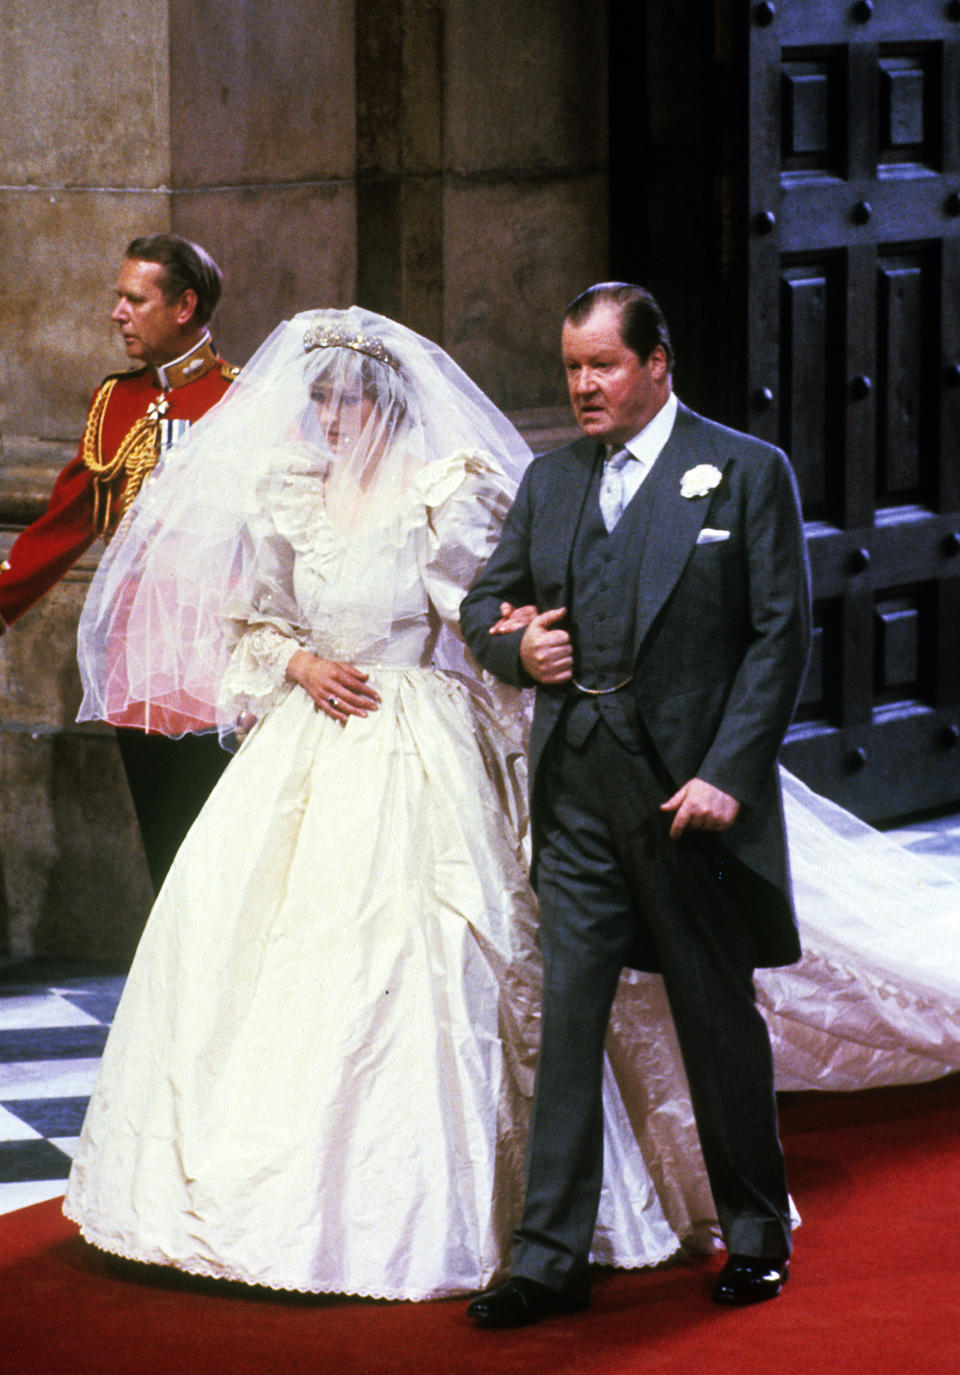 The princess' father John Spencer walked her down the aisle in 1981. (Getty Images)